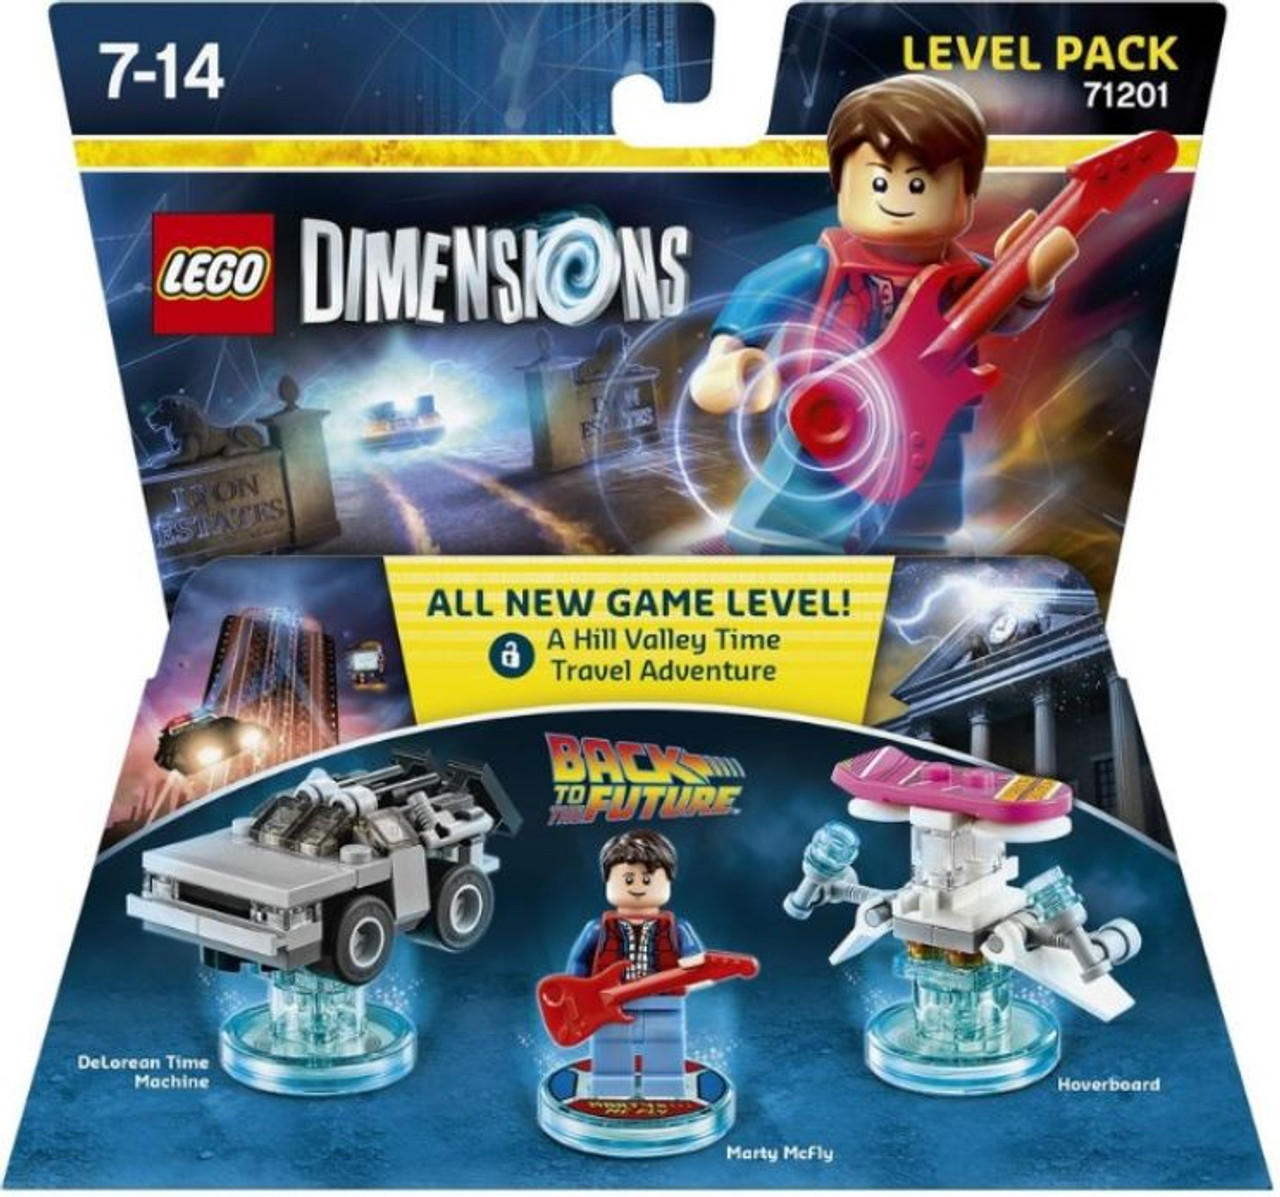 lego-dimensions-back-to-the-future-delorean-marty-mcfly-hoverboard-level-pack-71201-toywiz